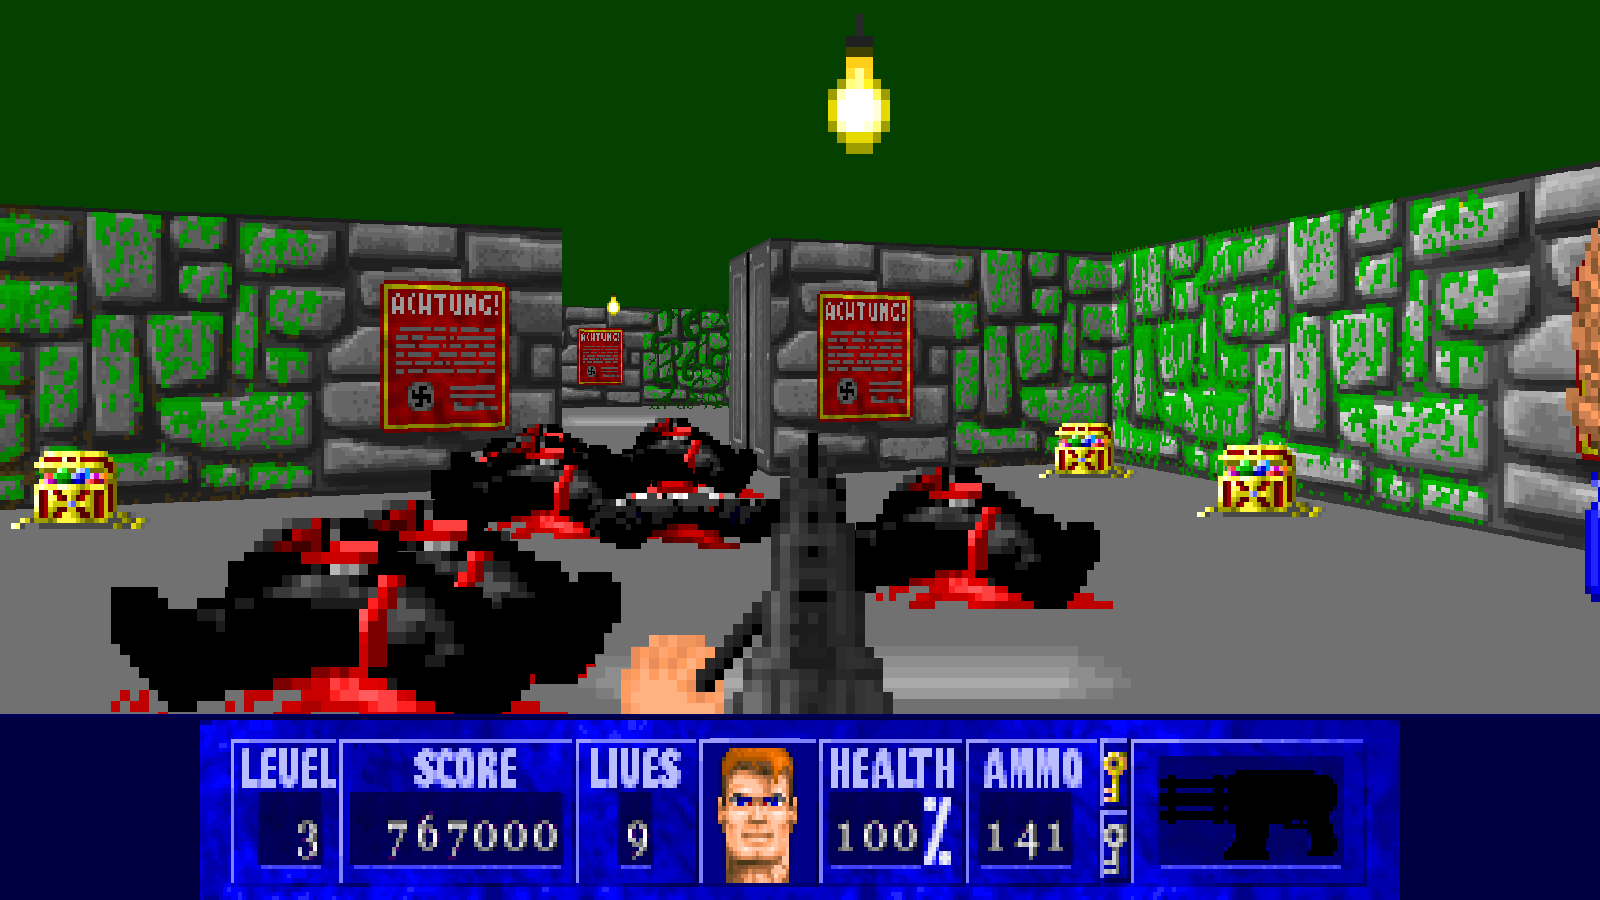 Spear Revisited mod for Wolfenstein 3D - Mod DB